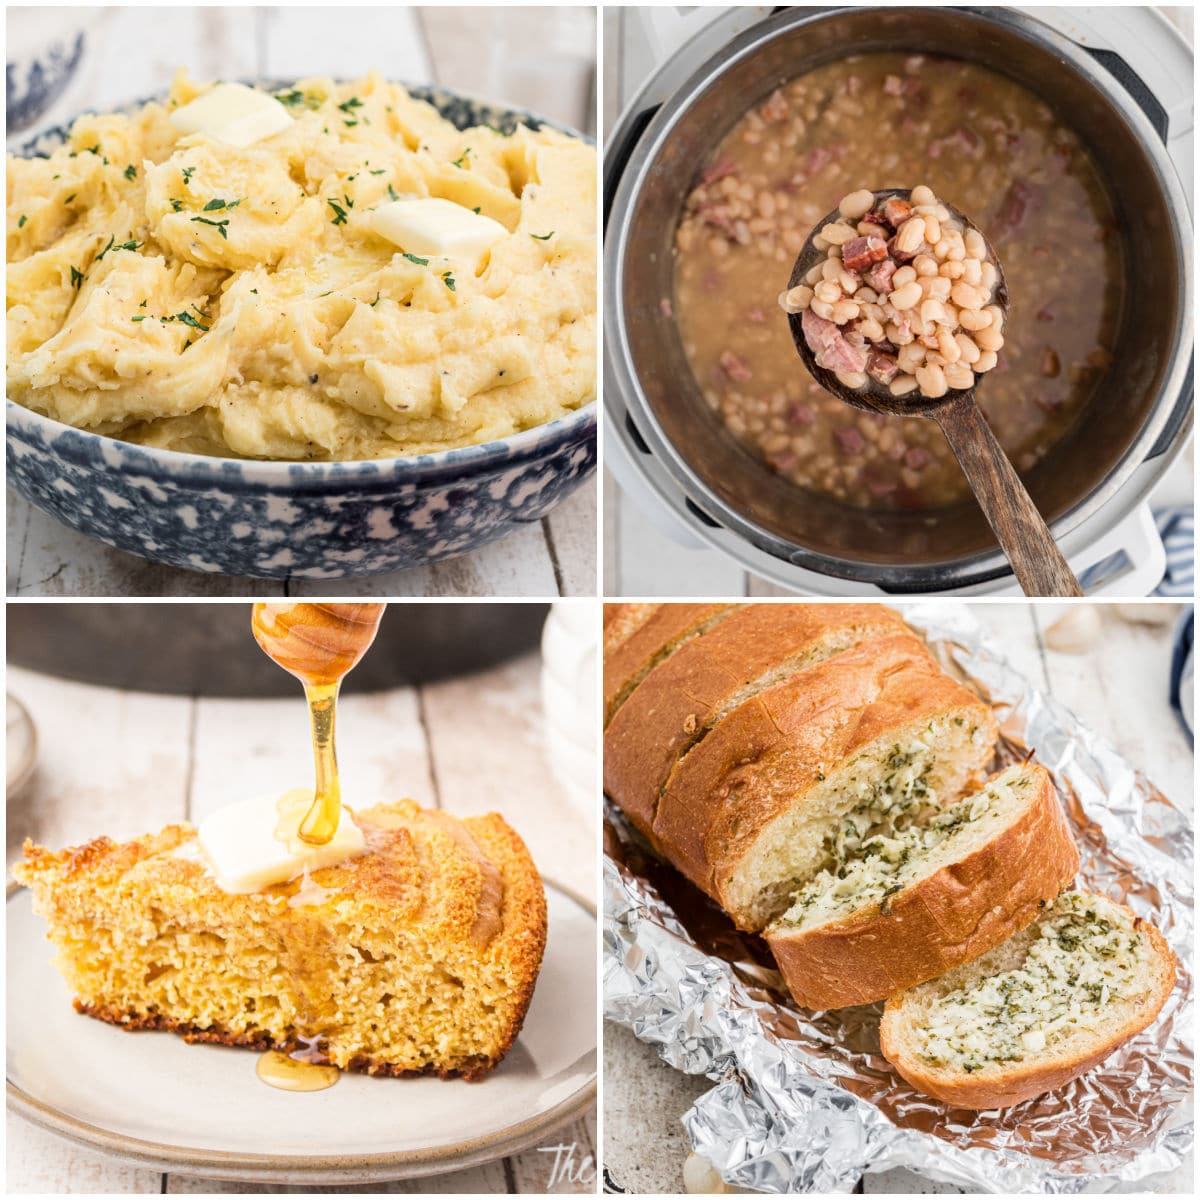 Collage of four images showing what could be served with cabbage rolls.